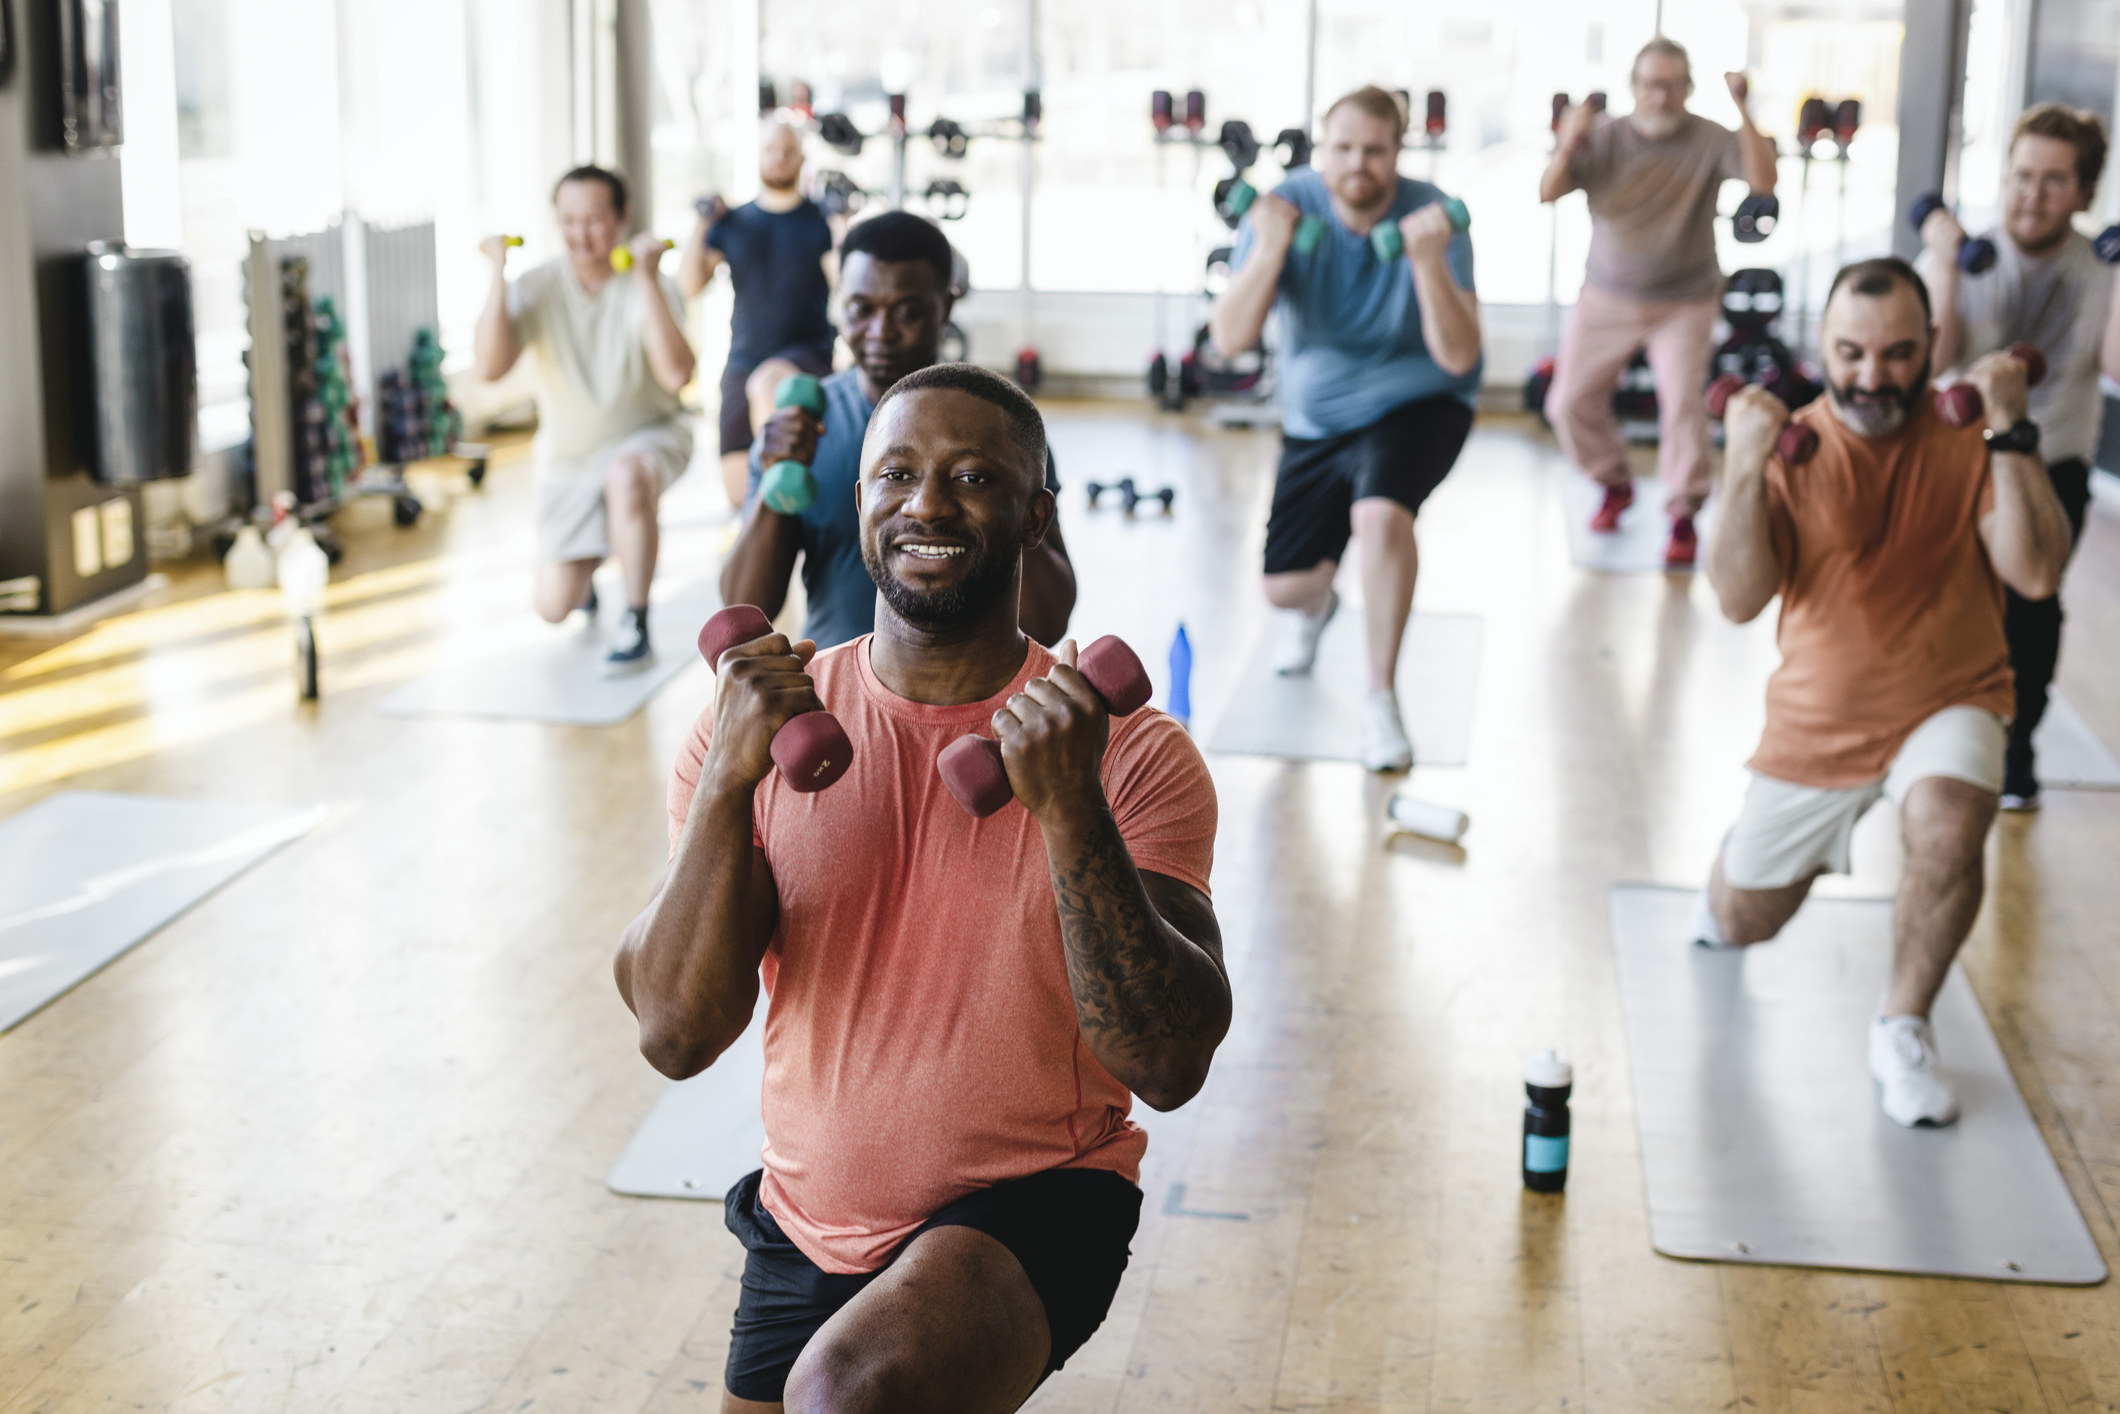 A man leads a workout class with small hand weights